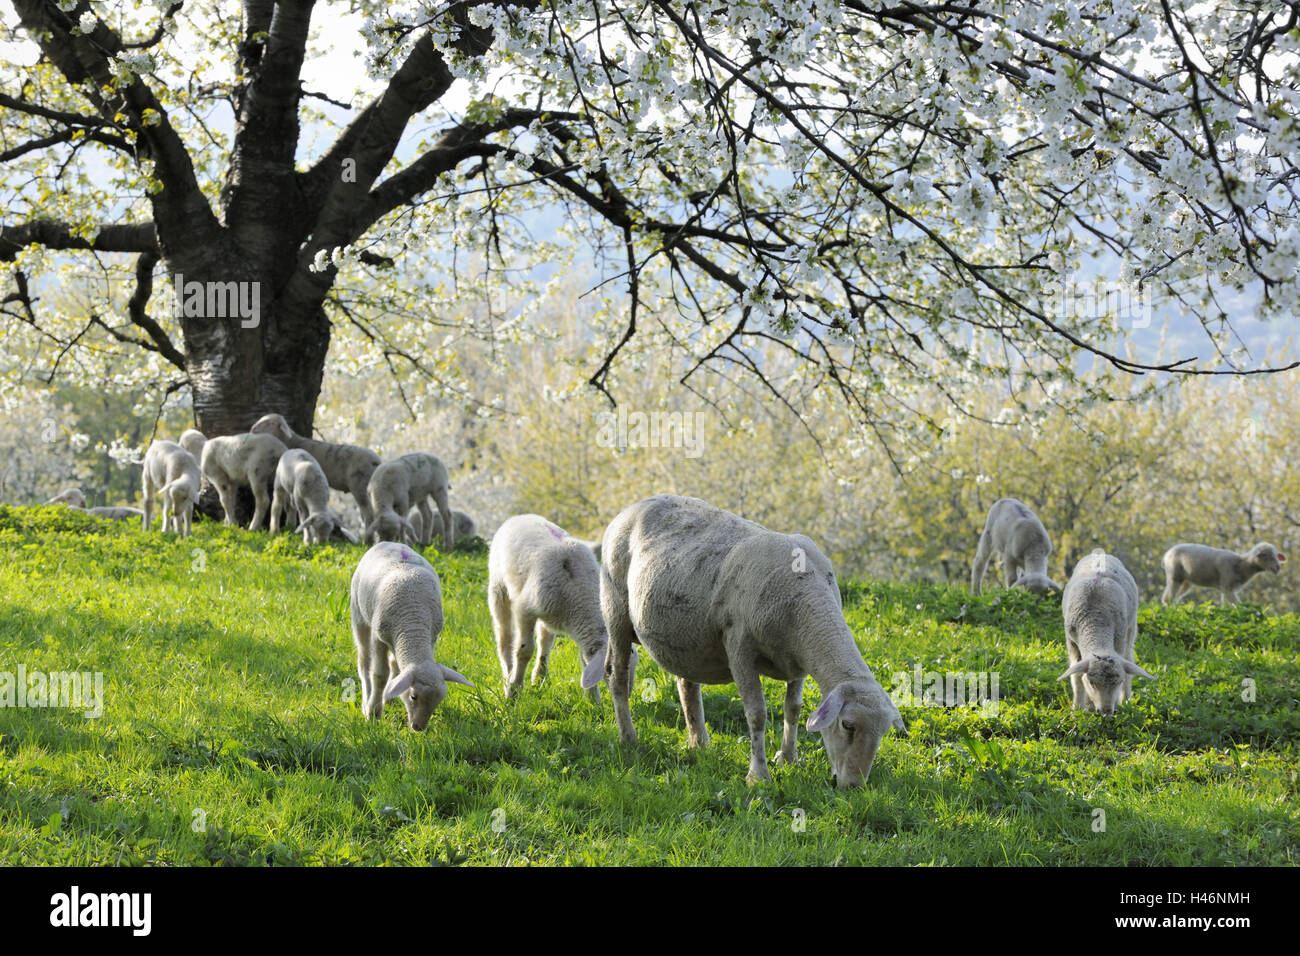 Meadow, sheep, graze, put out to pasture cherry trees, trees, breeding, sheep farming, benefit animals, animals, keeping pets, breeding, cattle breeding, nature, wool, wool animals, young animals, lambs, cherry tree, blossom, Stock Photo